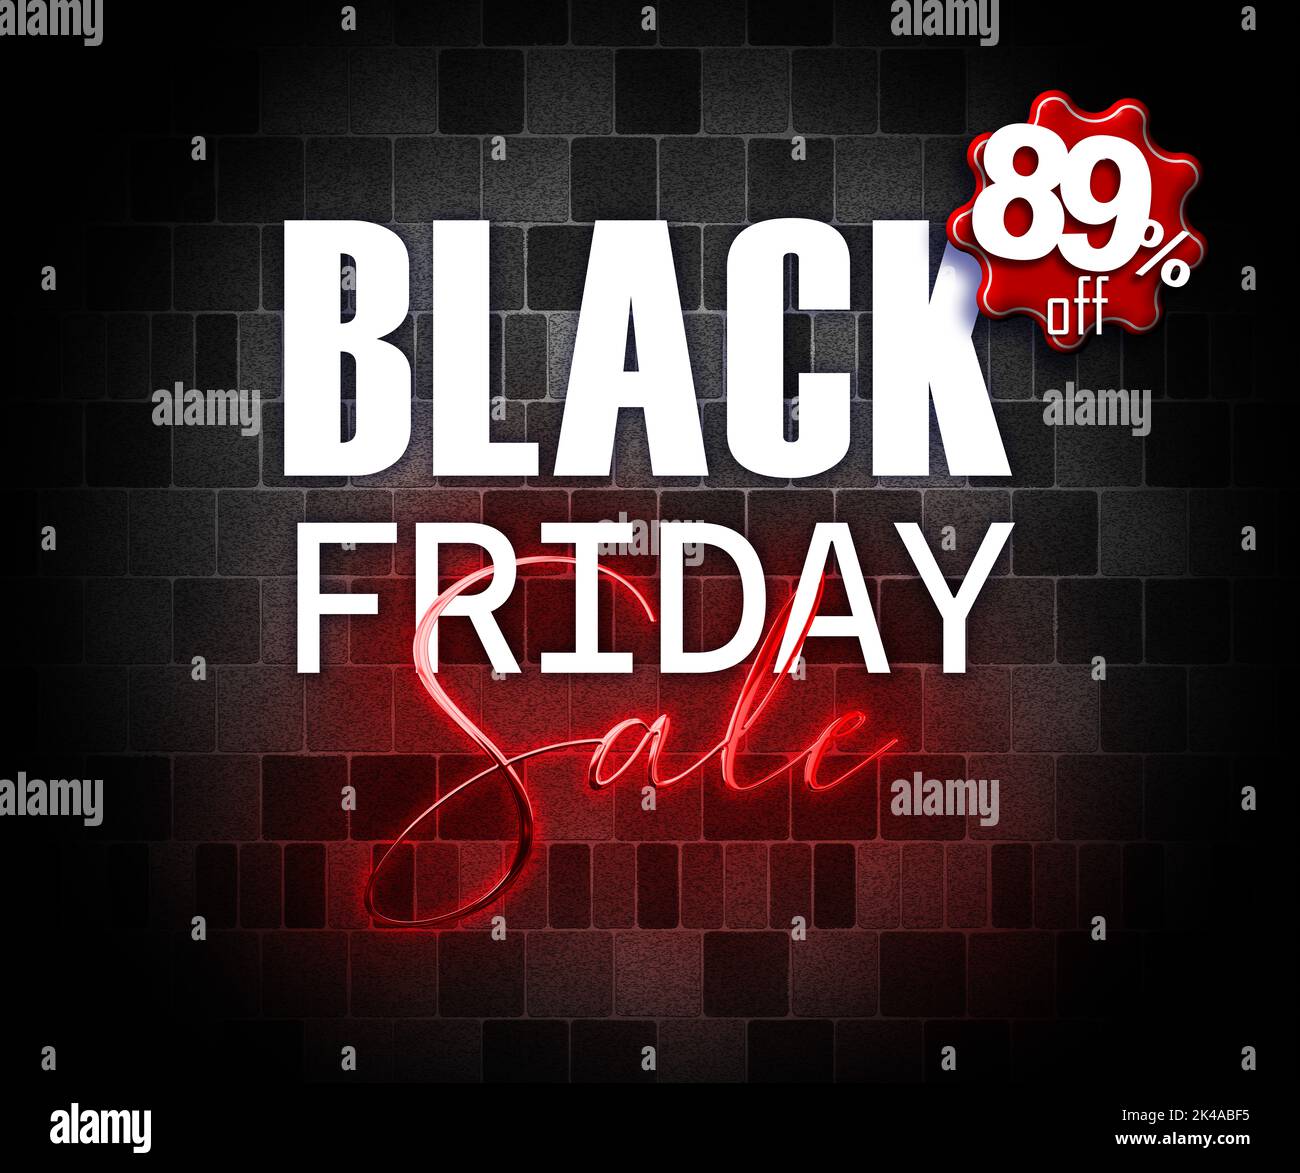 illustration with 3d elements black friday promotion banner 89 percent off sales increase Stock Photo